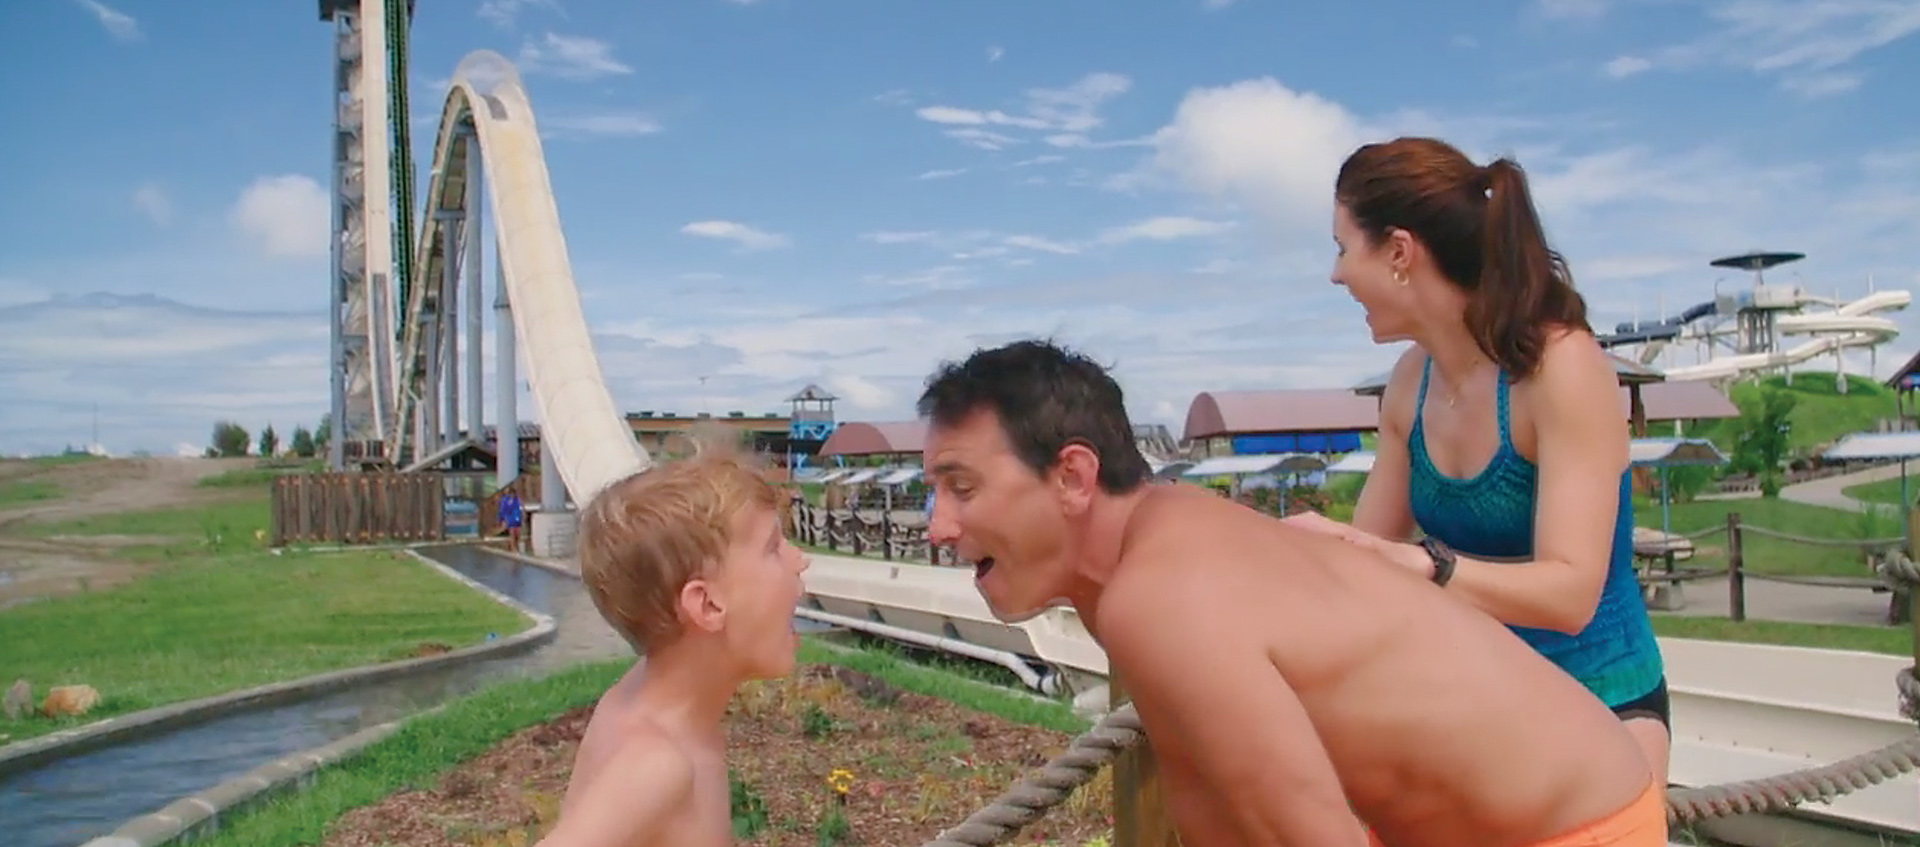 (right to left) son, father, and mother in front of a waterslide